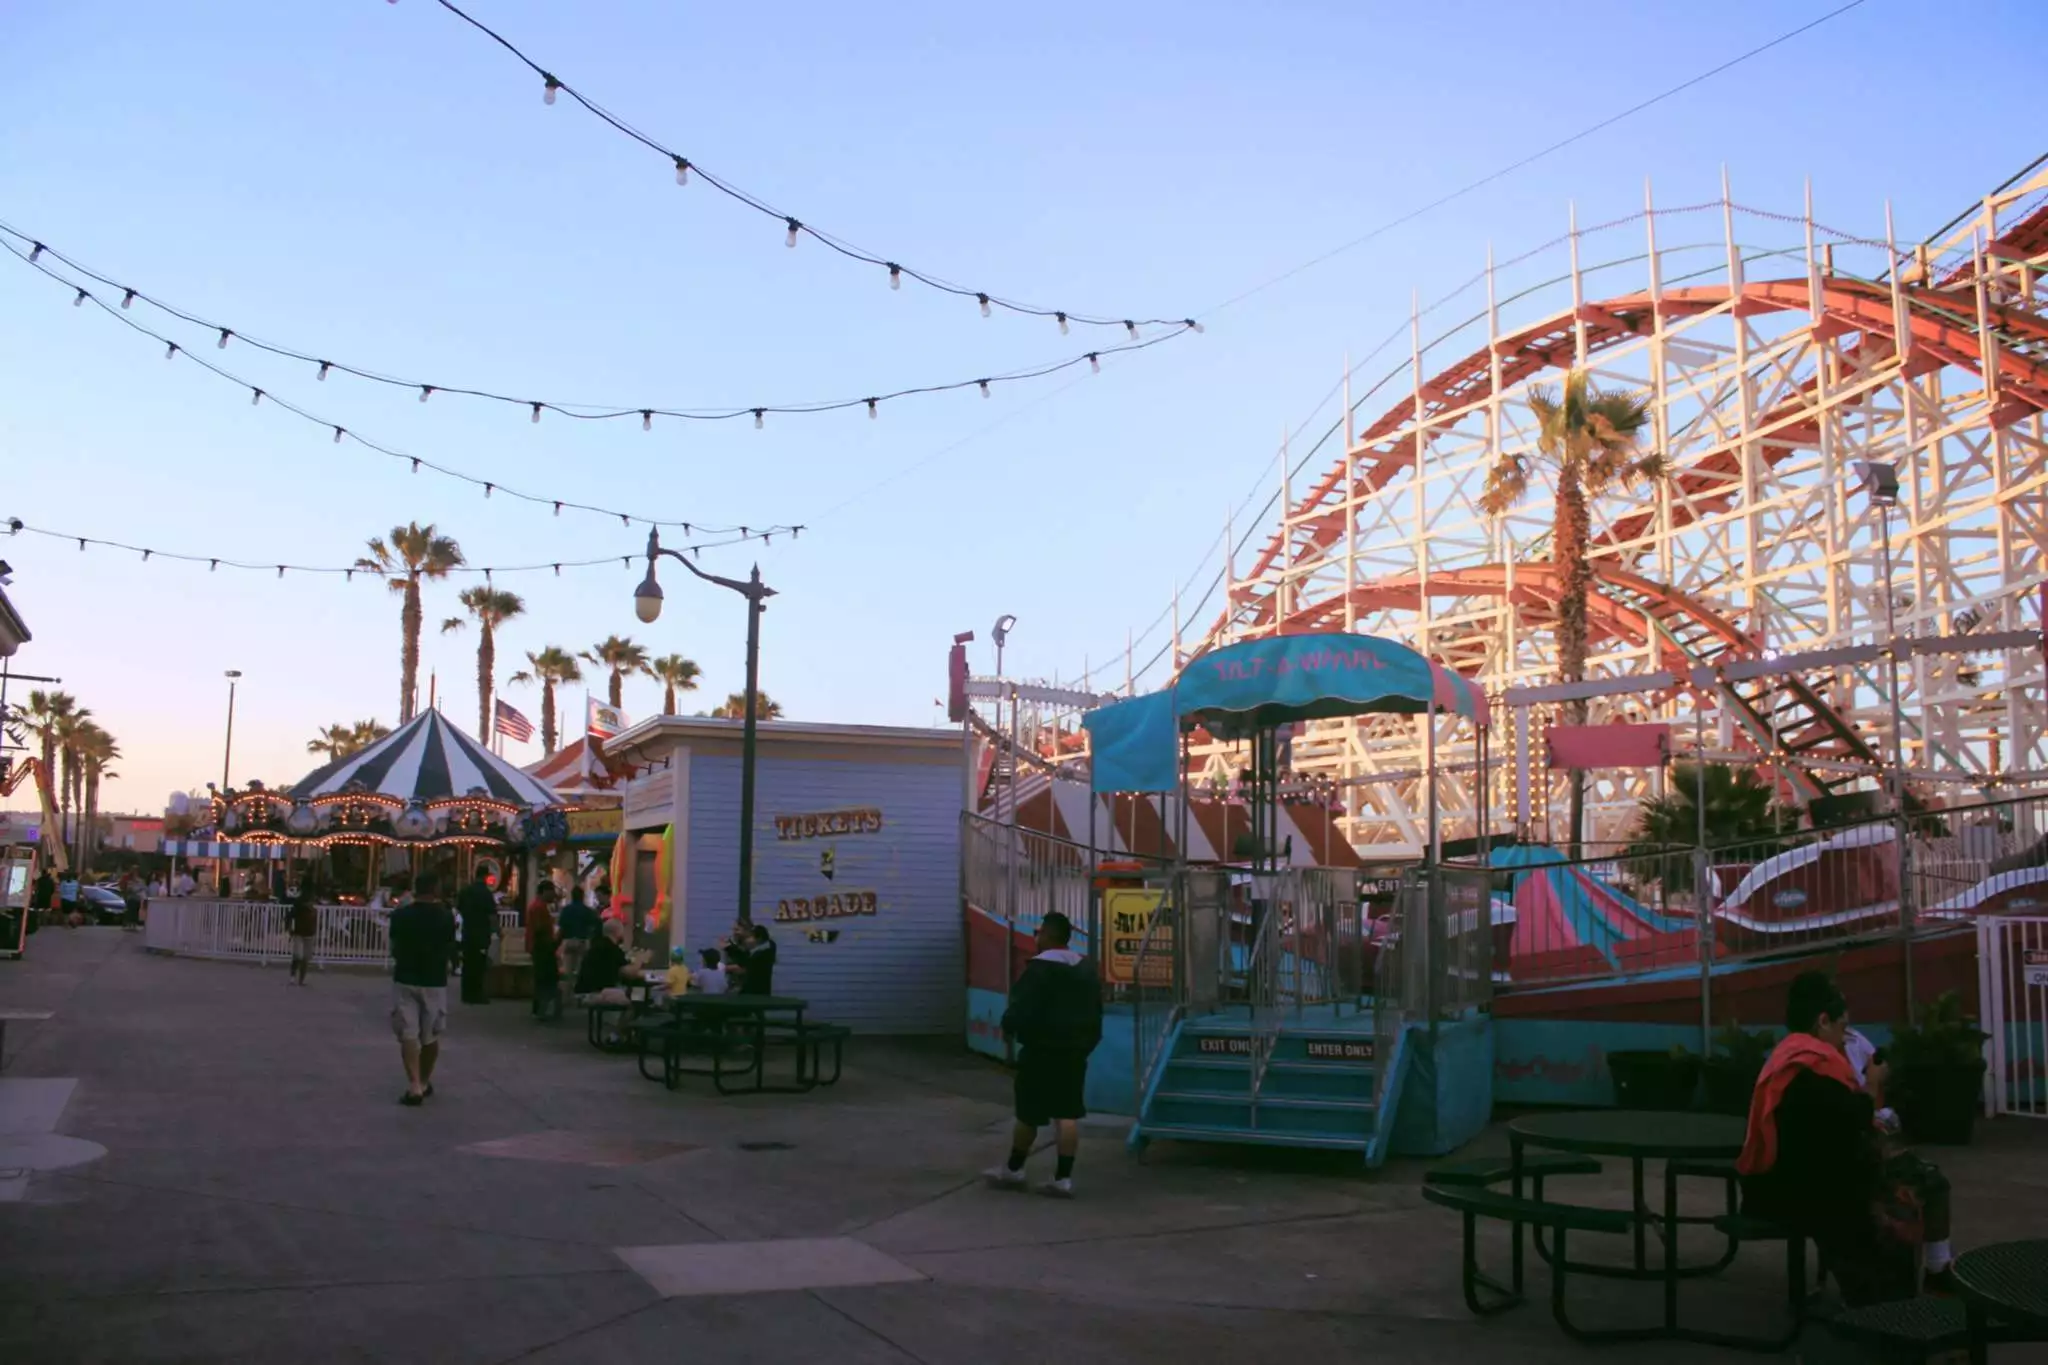 Things to do in San Diego